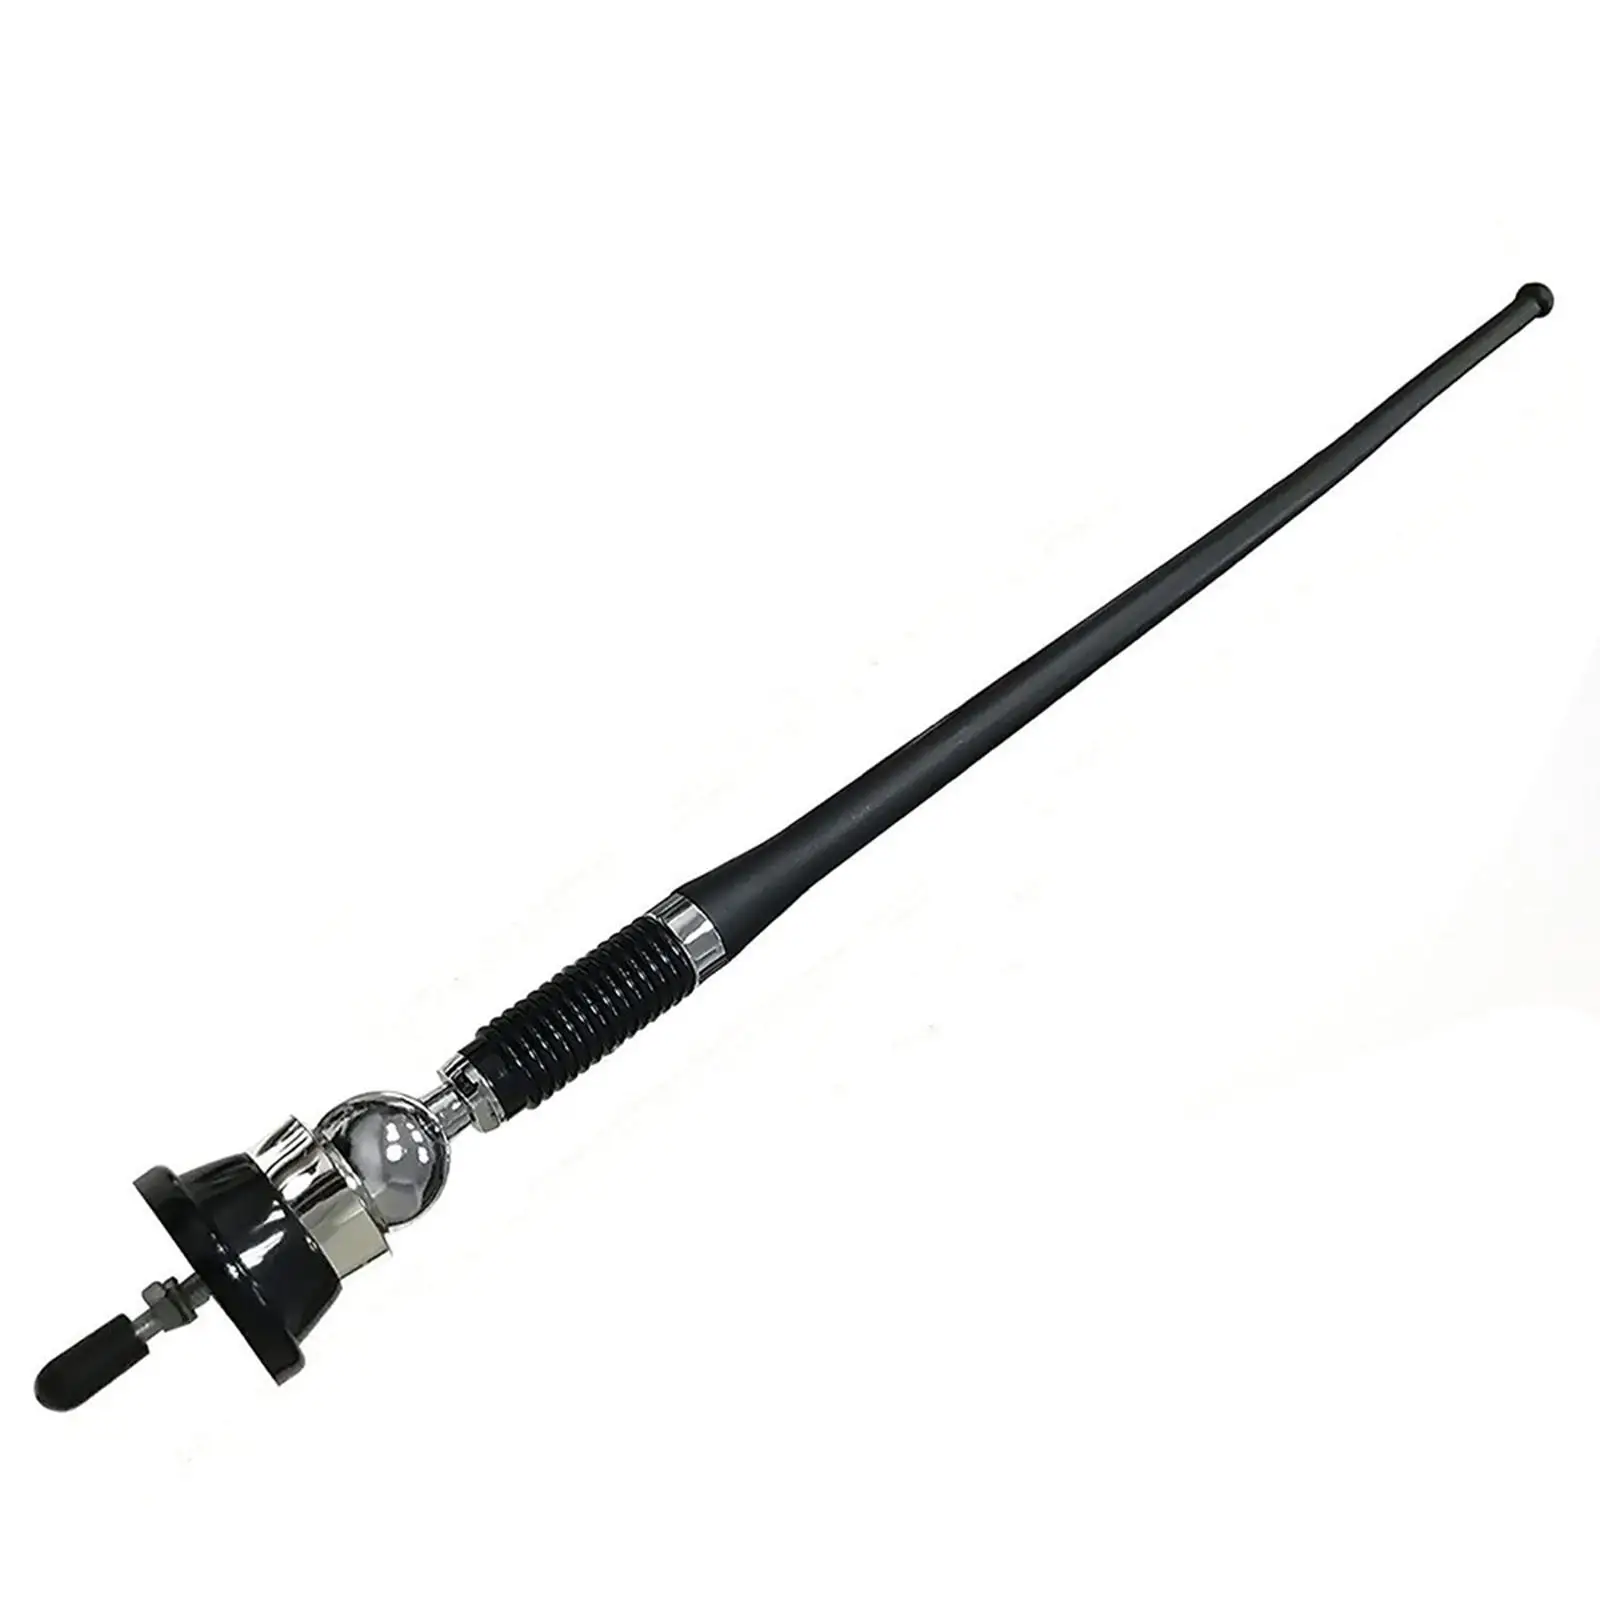 Universal Car Radio Antenna AM FM Roof Fender Mount Replacement Auto Aerial Flexible Mast for Truck SUV Vehicles Automotive